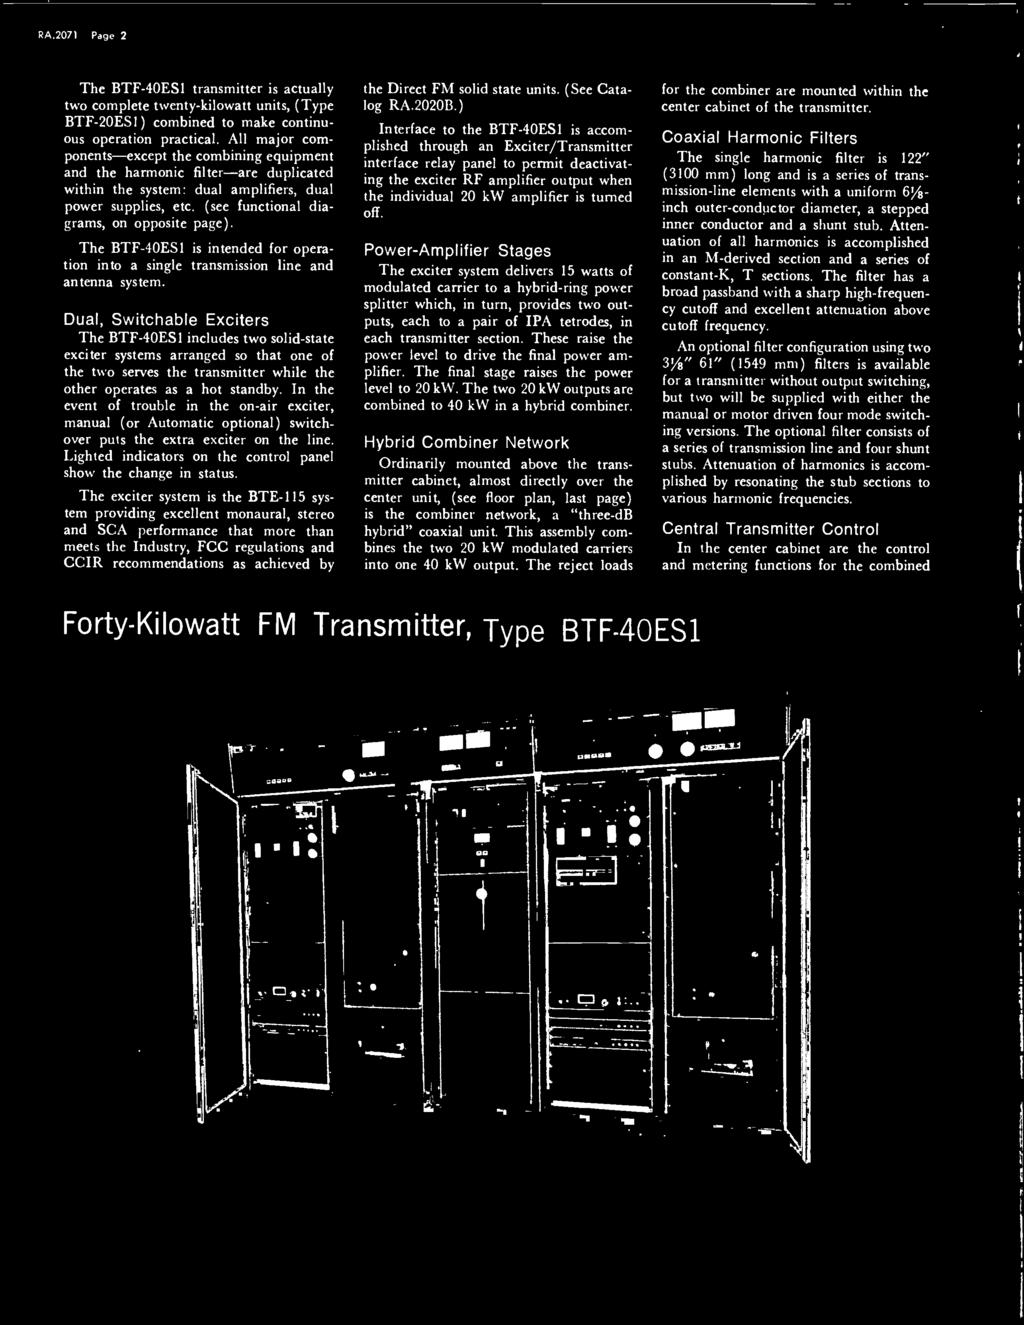 RA.2071 Page 2 The BTF-40ES1 transmitter is actually two complete twenty -kilowatt units, (Type BTF-20ES1) combined to make continuous operation practical.